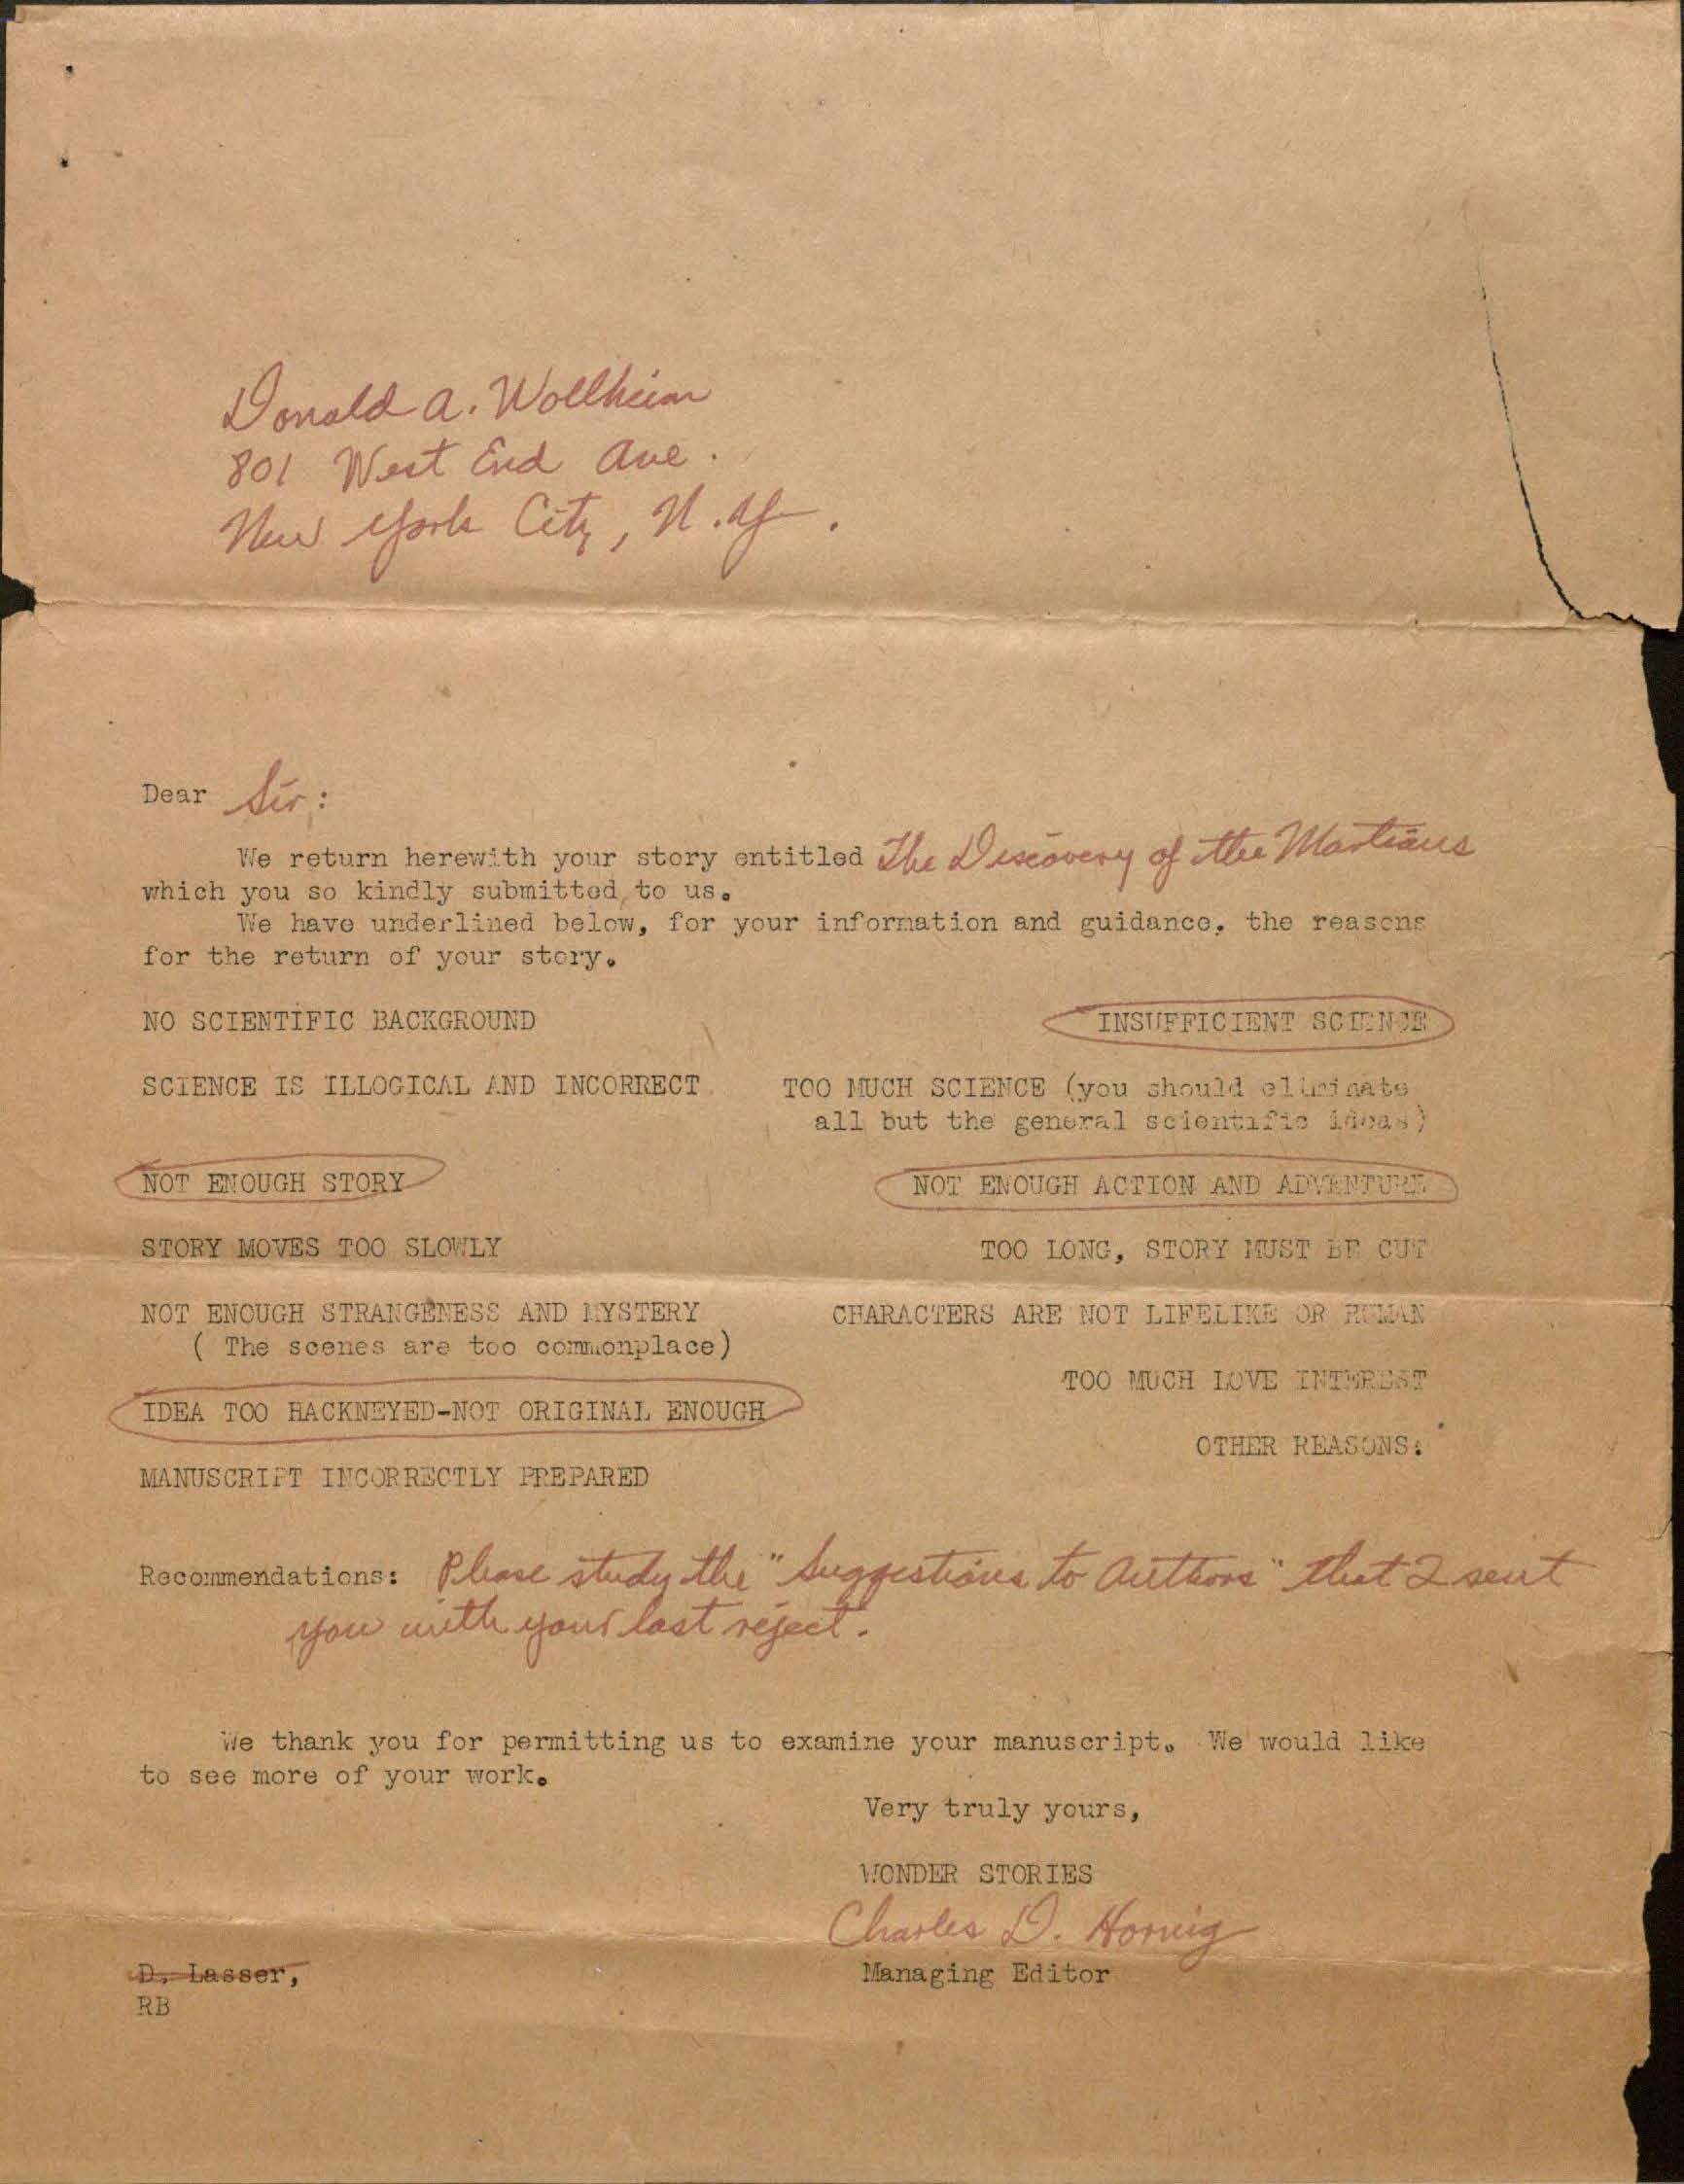 Image of Wonder Stories' form rejection letter for Wollheim's "The Discovery of the Martians", [1933].